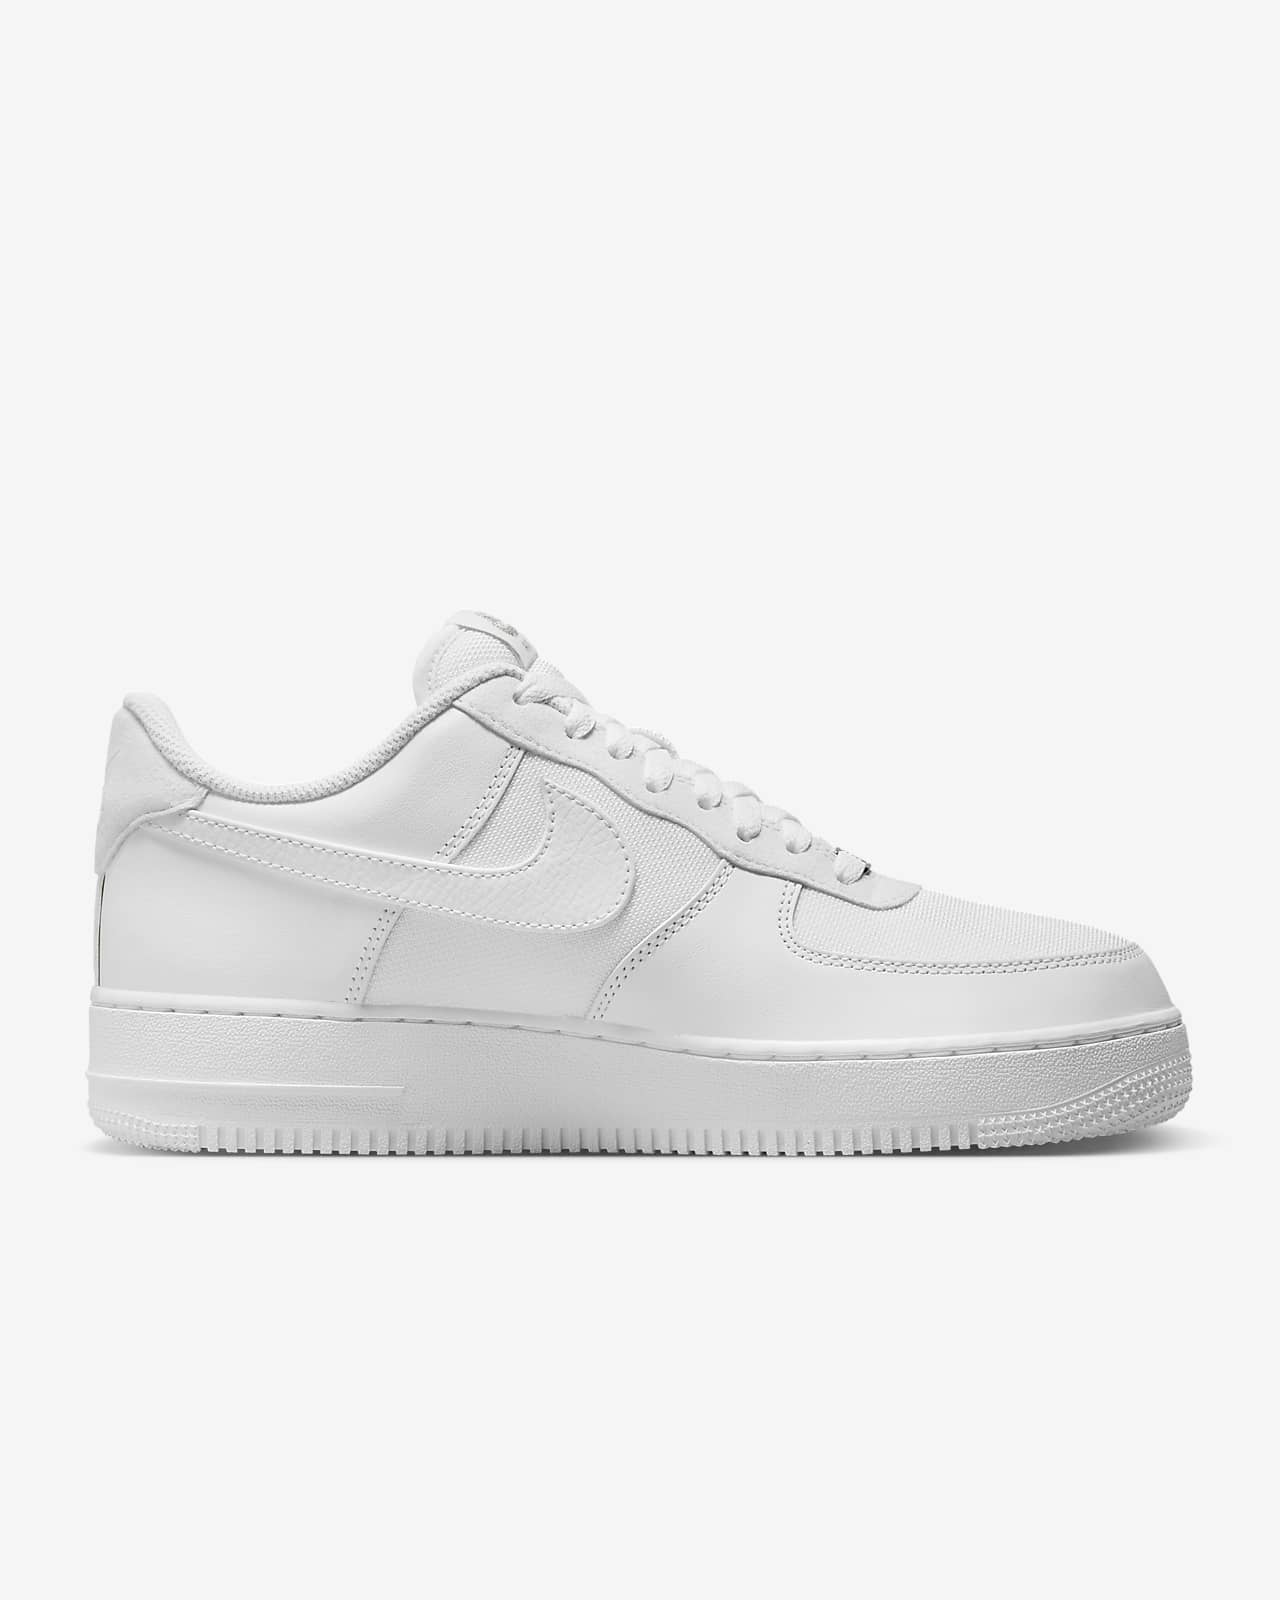 Nike Air Force 1 '07 LV8 Shoes.